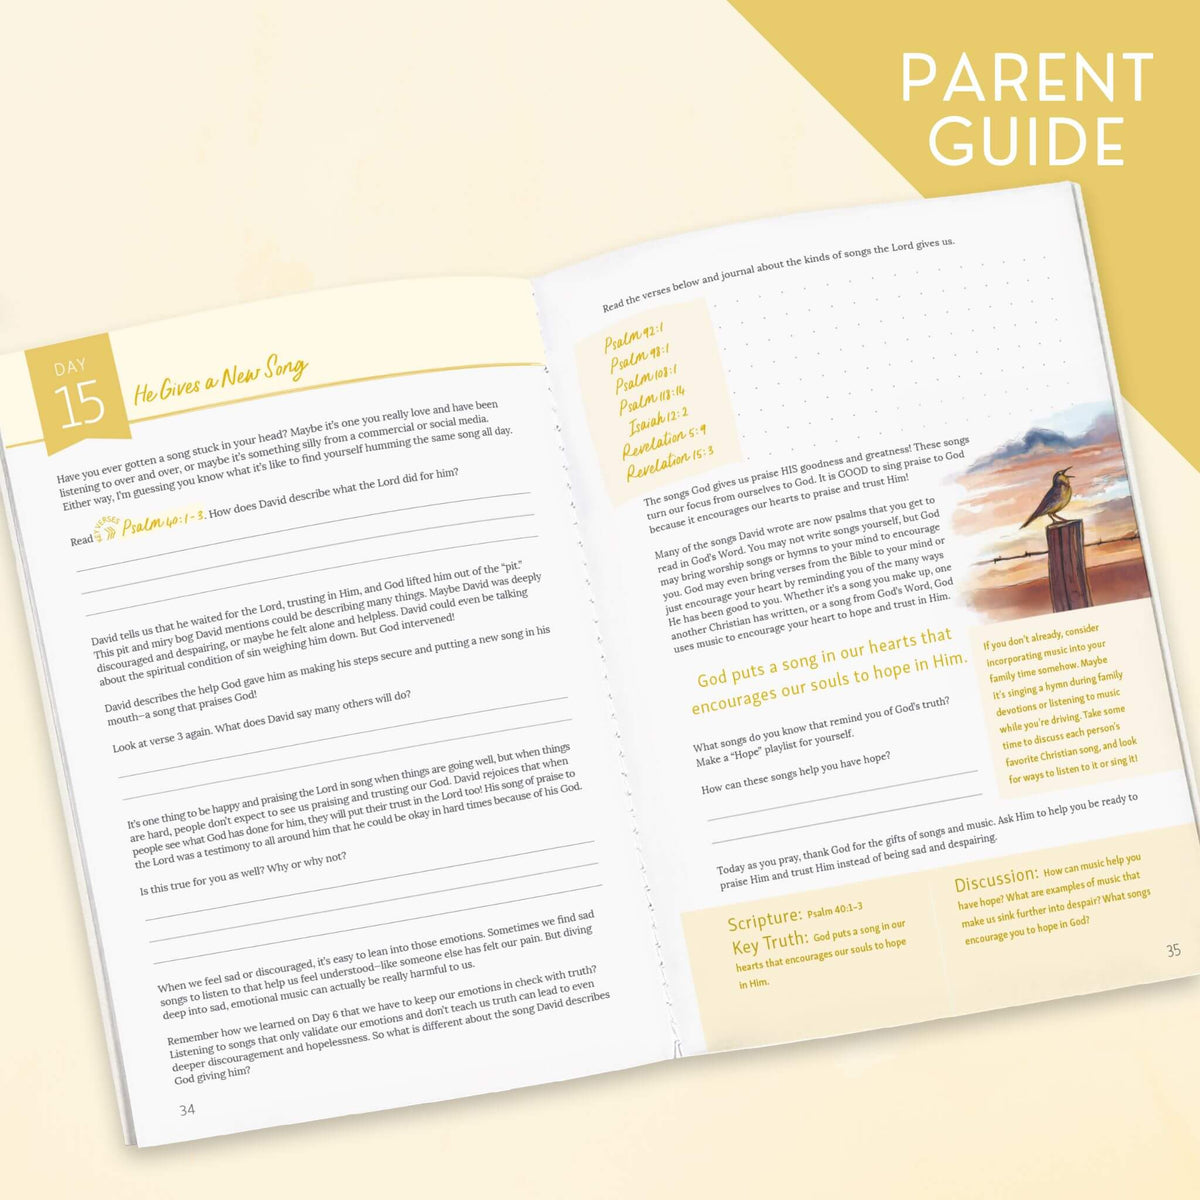 Abounding in Hope digital printable Bible Study parent guide- inside